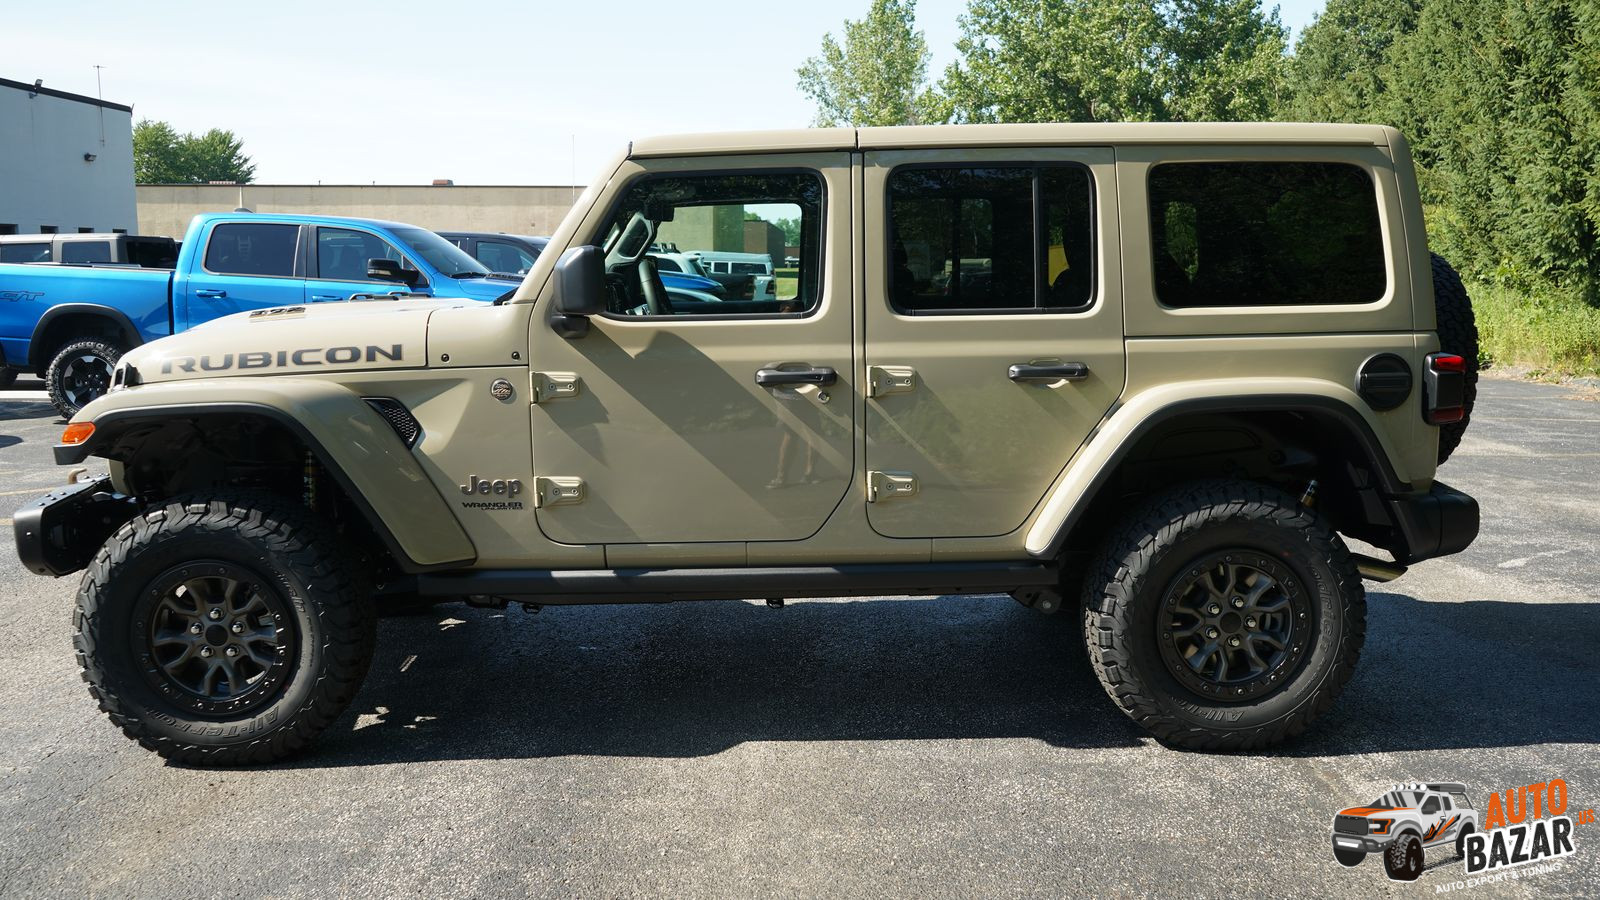 2022 Jeep Wrangler Unlimited Rubicon 392, Buy 83195$, 2022 Jeep Wrangler  Unlimited Rubicon 392